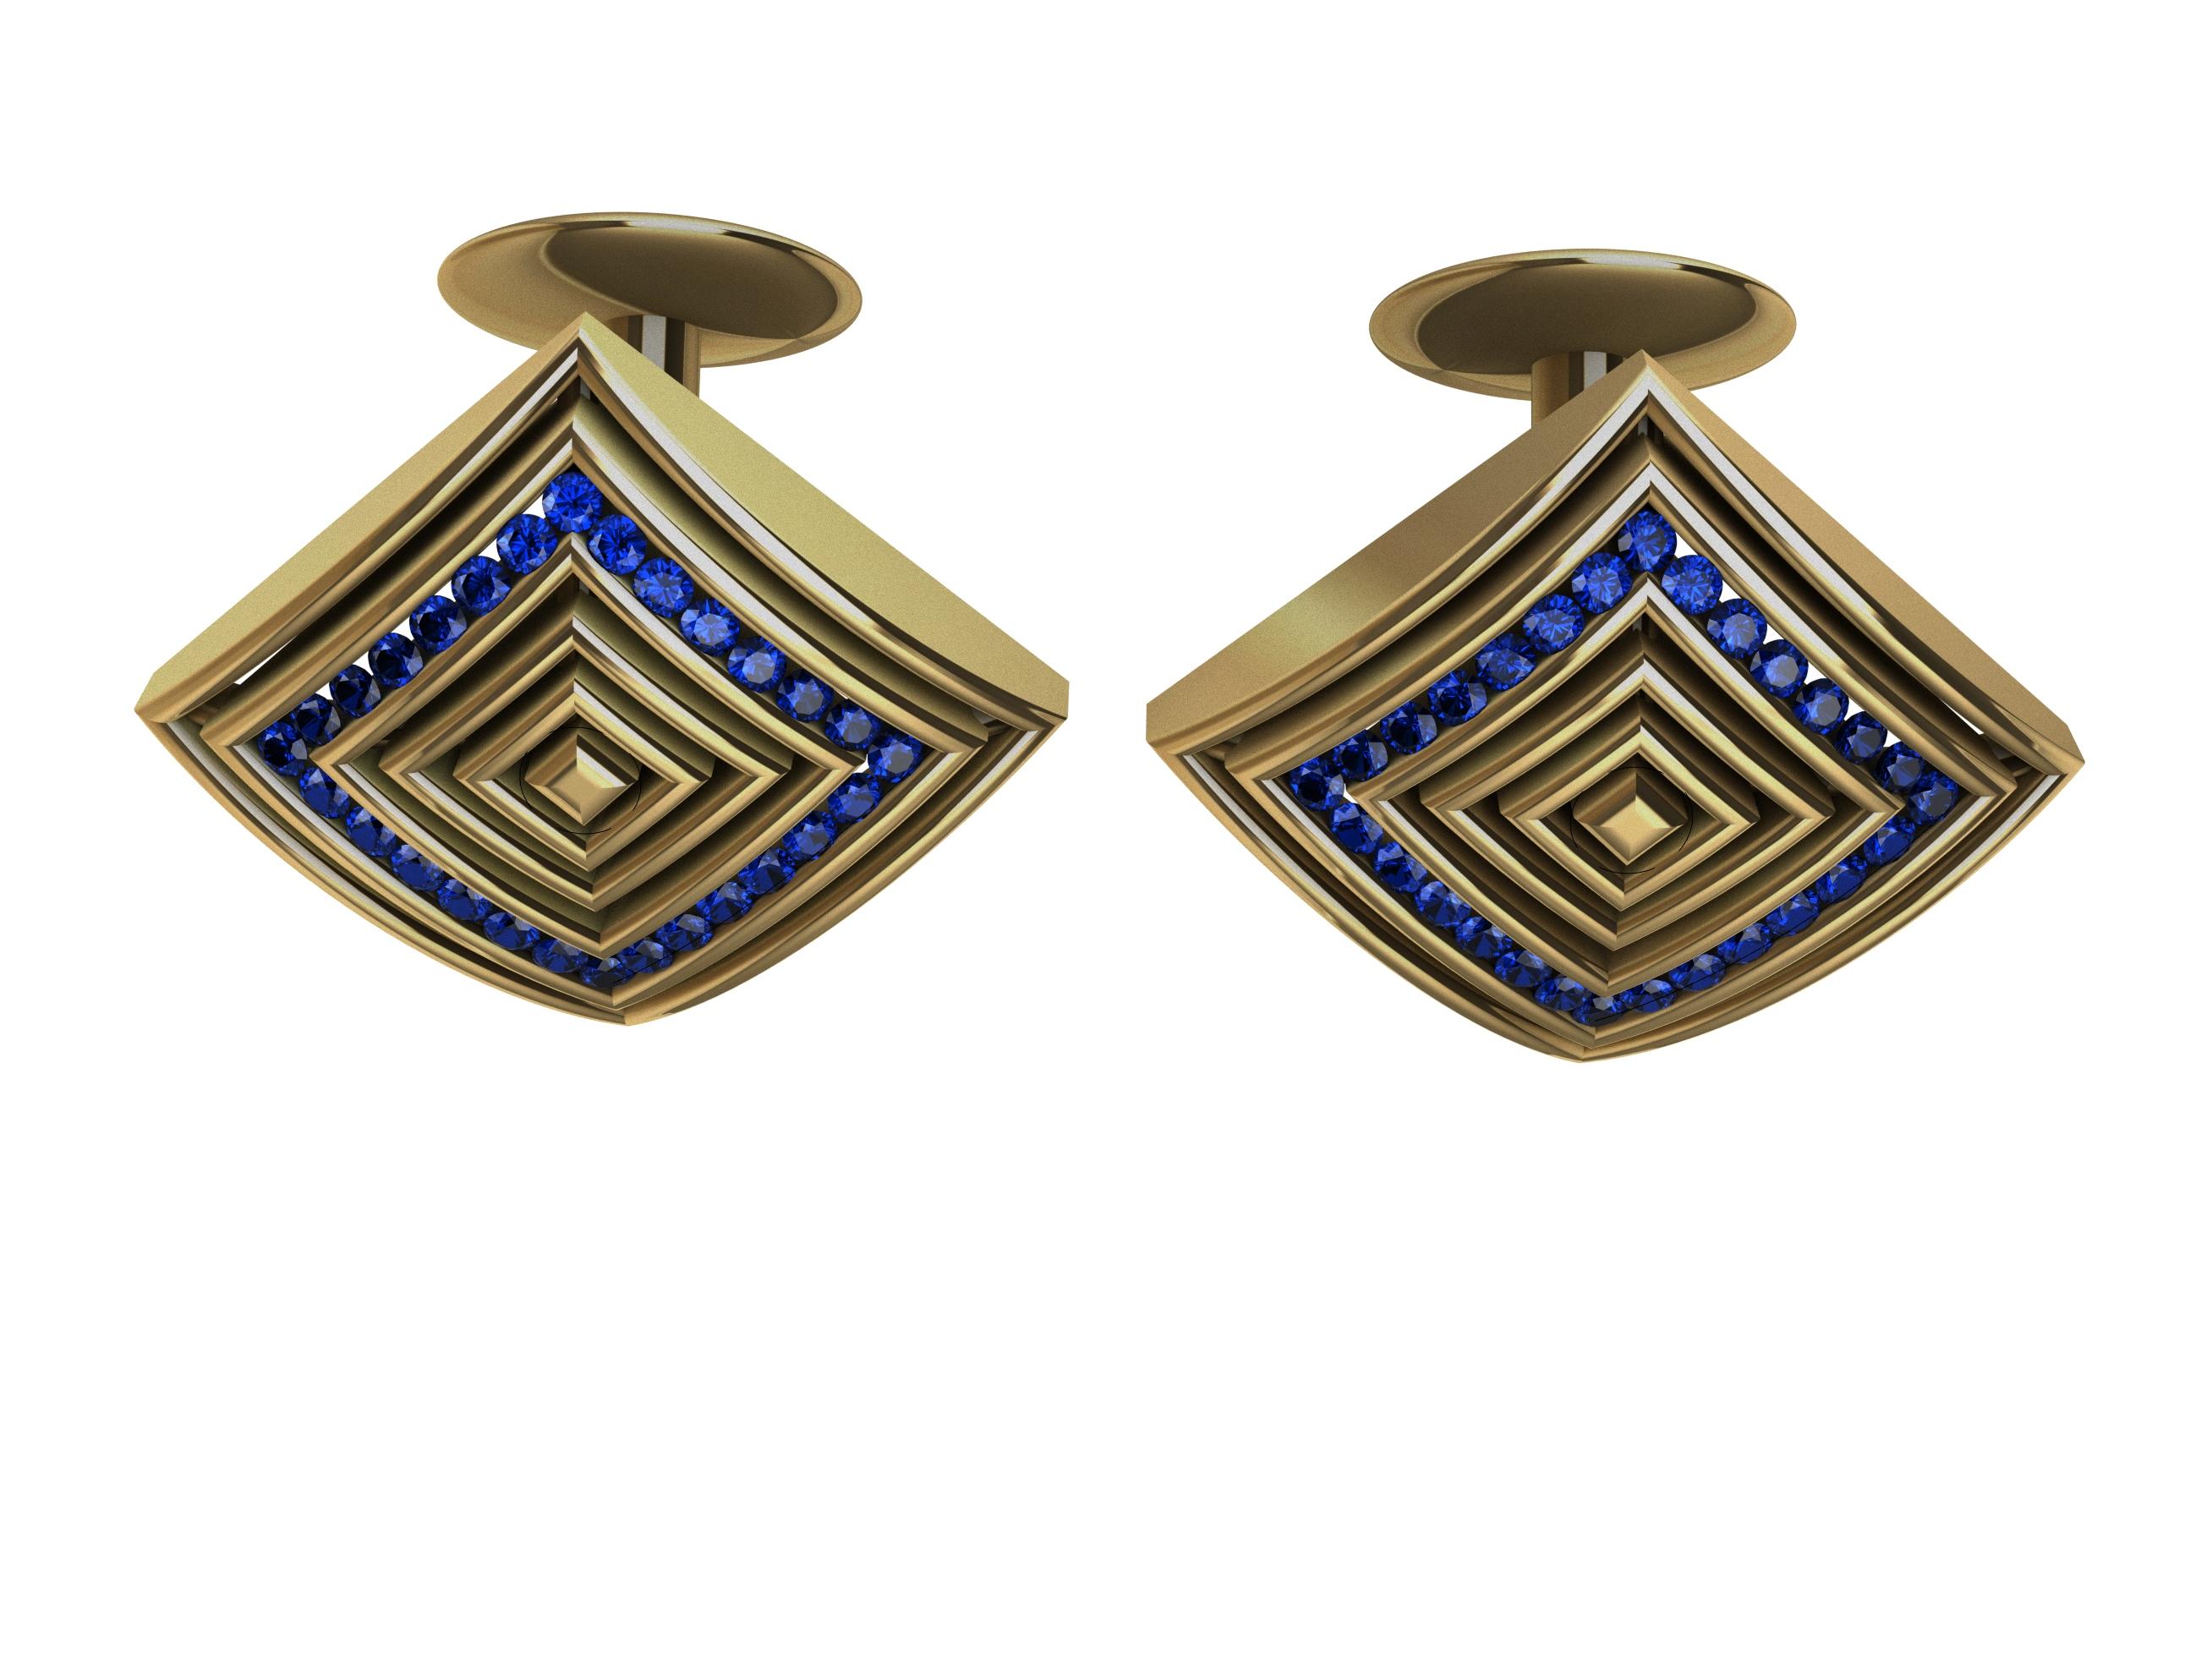 18 Karat Yellow Gold Sapphires Rhombus Cufflinks 
 From the Air Cooled Series. I designed rings from this shape. Now cuff links. Inspired by light, and air movement . Simple domed rhombus shape with repeating rows to create a playfulness with the